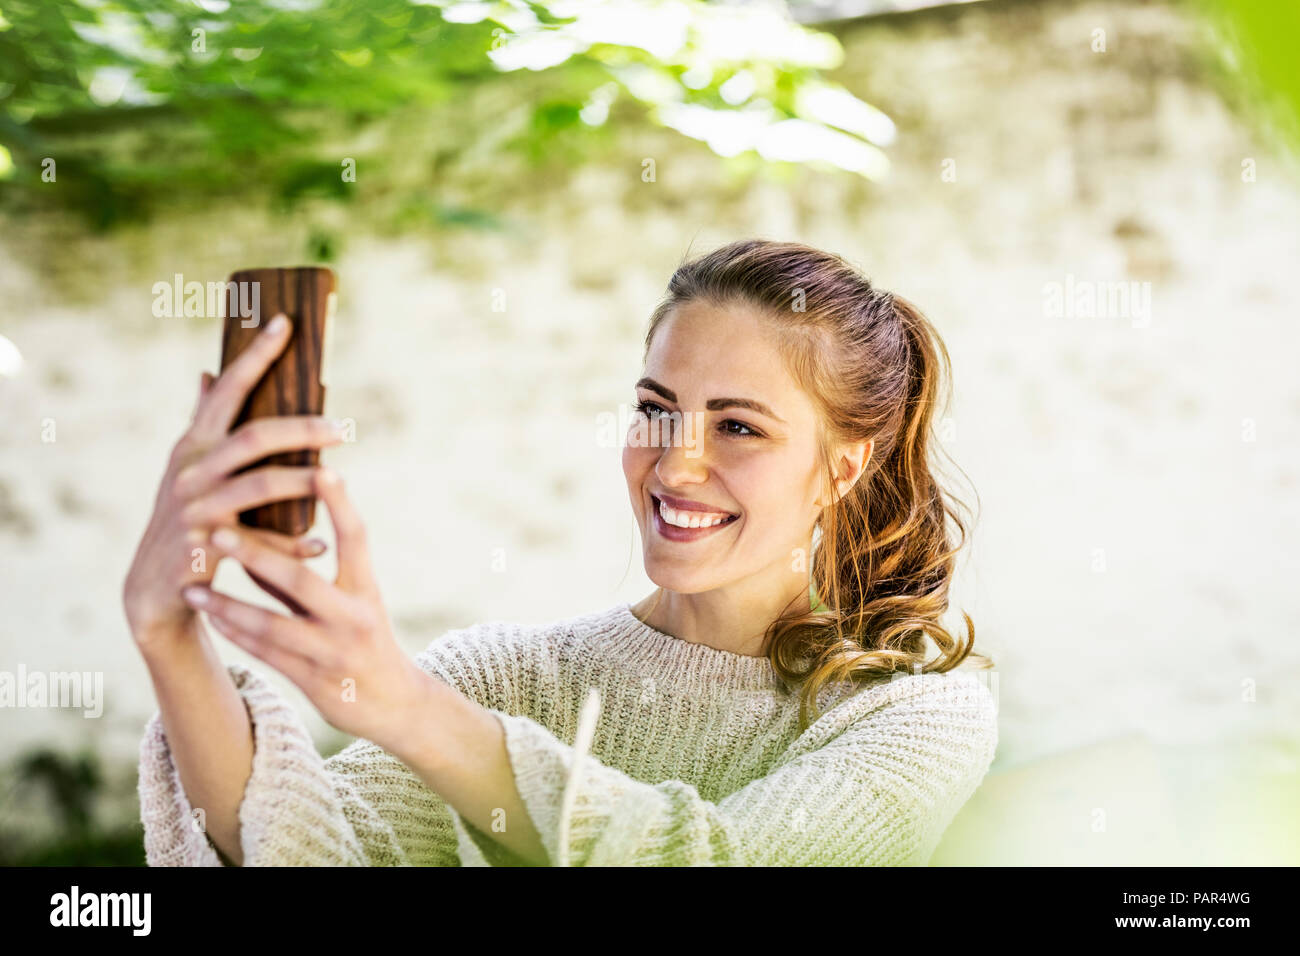 Portrait of relaxed woman taking selfie with cell phone Stock Photo